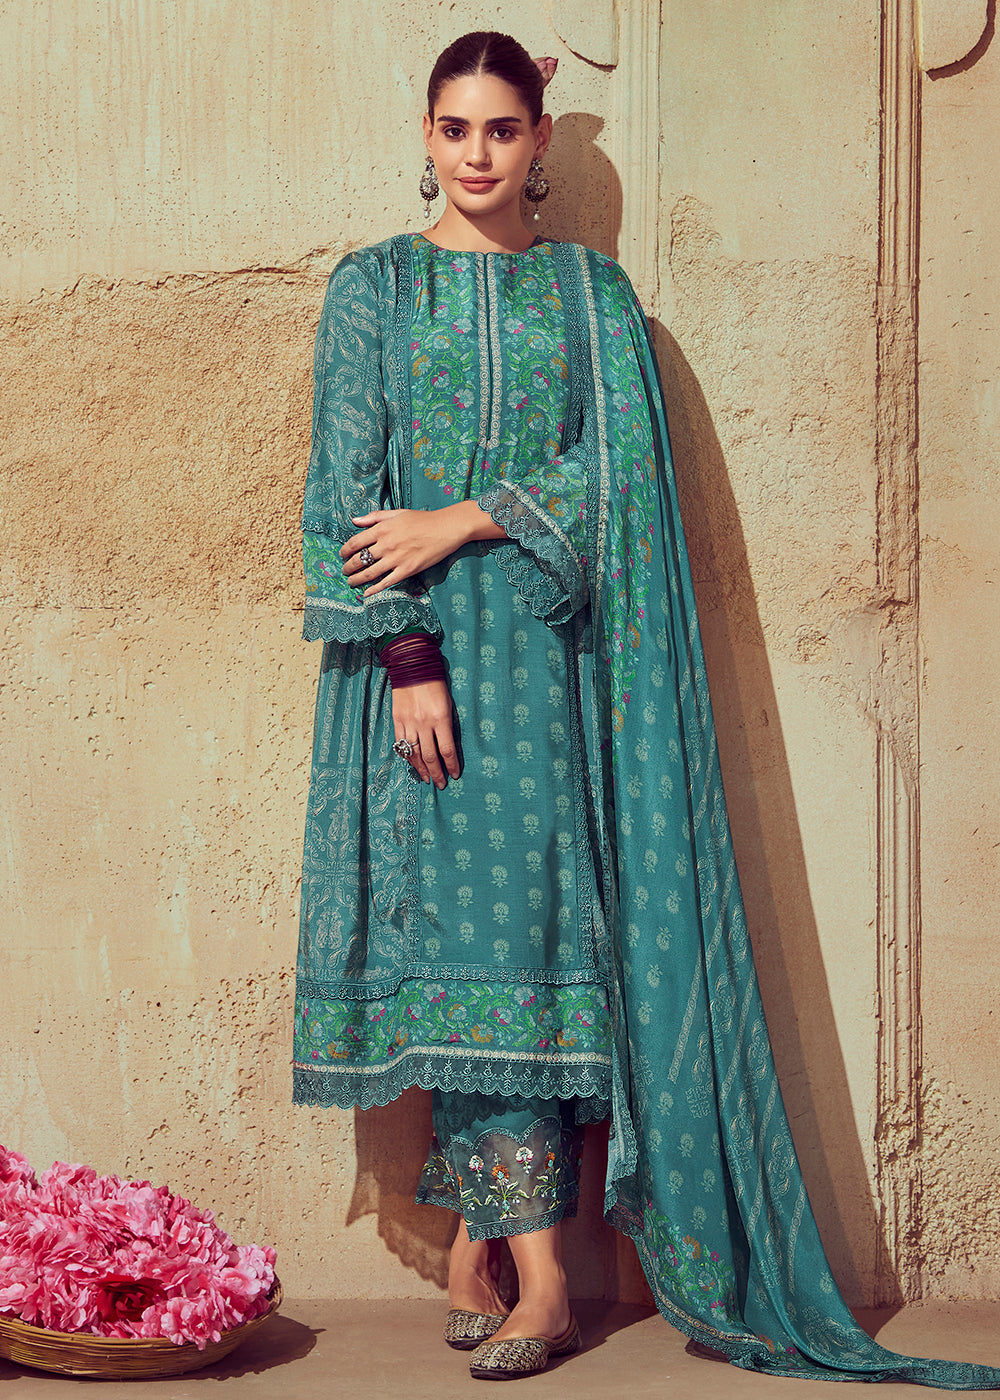 Buy Now Digital Printed & Embroidered Rama Green Muslin Salwar Suit Online in USA, UK, Canada, Germany, Australia & Worldwide at Empress Clothing. 